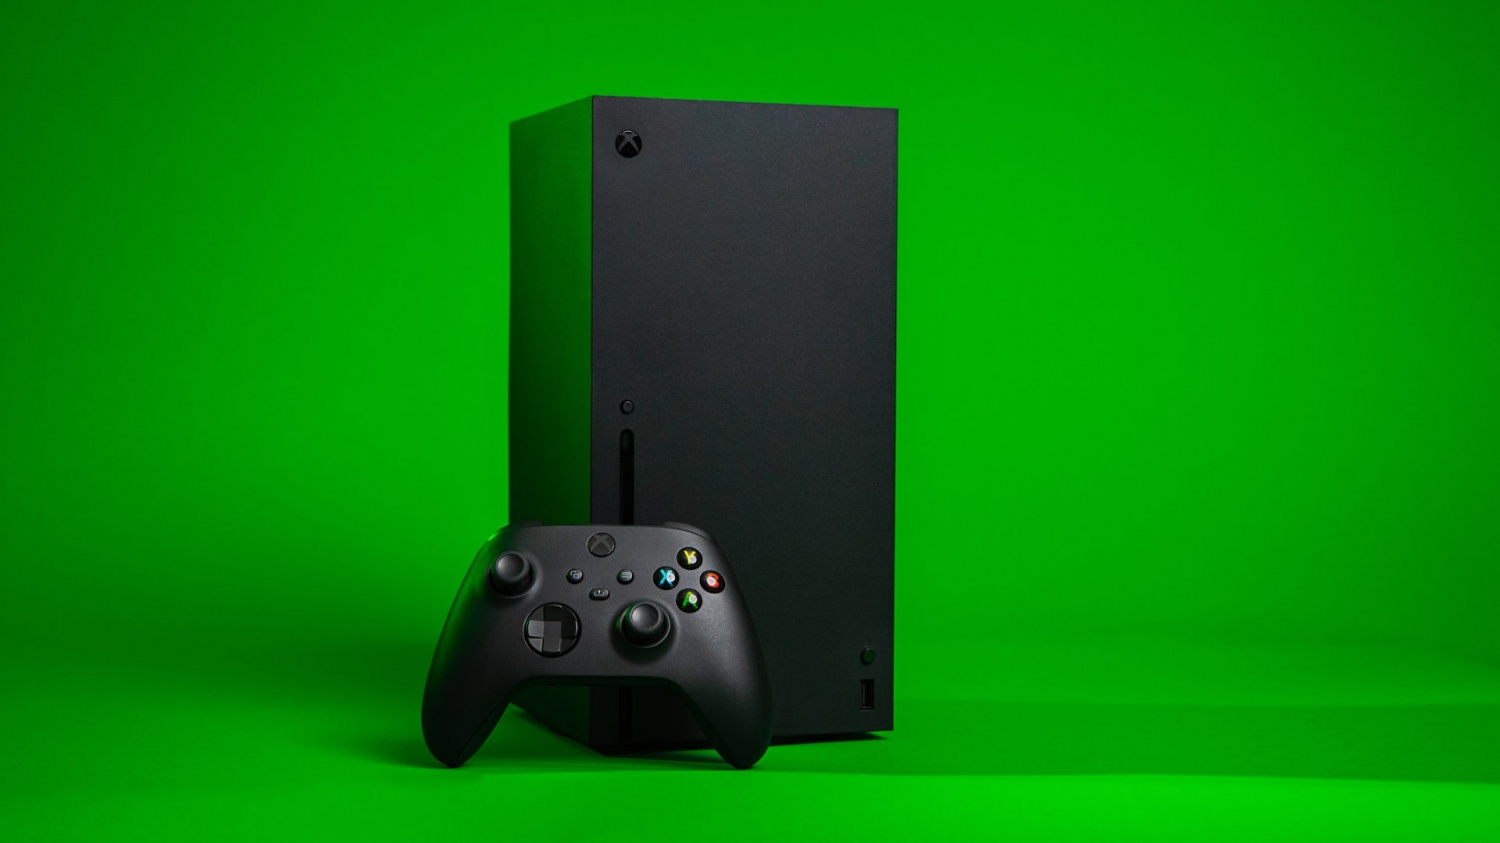 Xbox Series X Restock Tracker: Target, Best Buy Up for In-Store Pickups